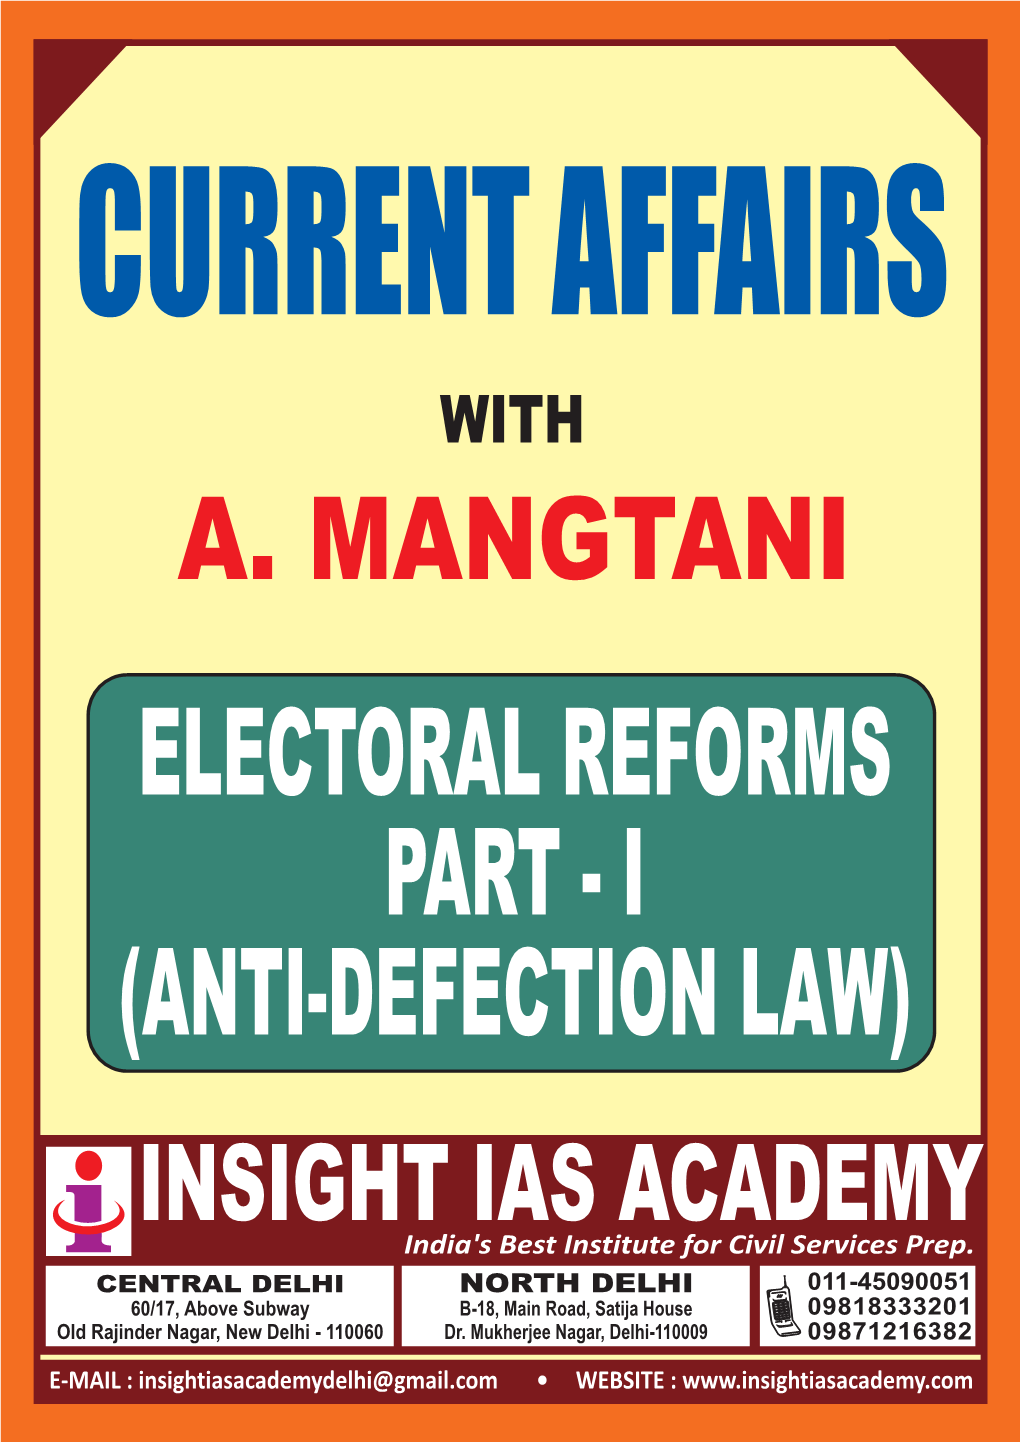 A. MANGTANI ELECTORAL REFORMS PART - I (ANTI-DEFECTION LAW) INSIGHT IAS ACADEMY India's Best Institute for Civil Services Prep